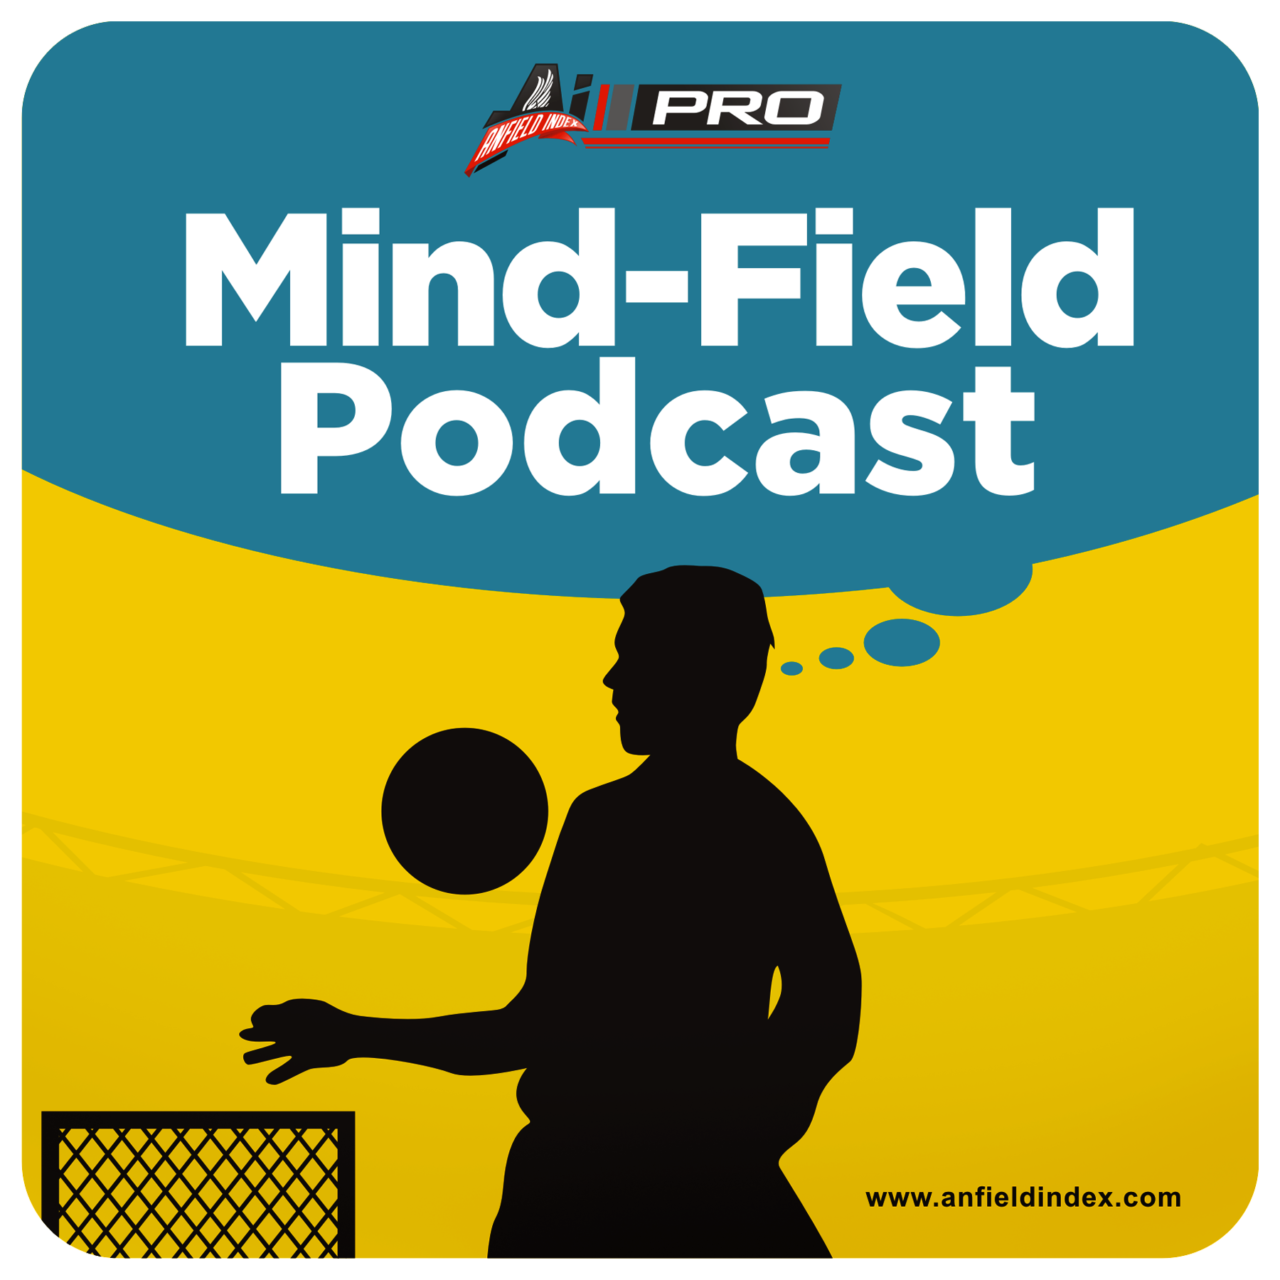 The Mind-Field Podcast: Are we better at corners - Neuroscience?